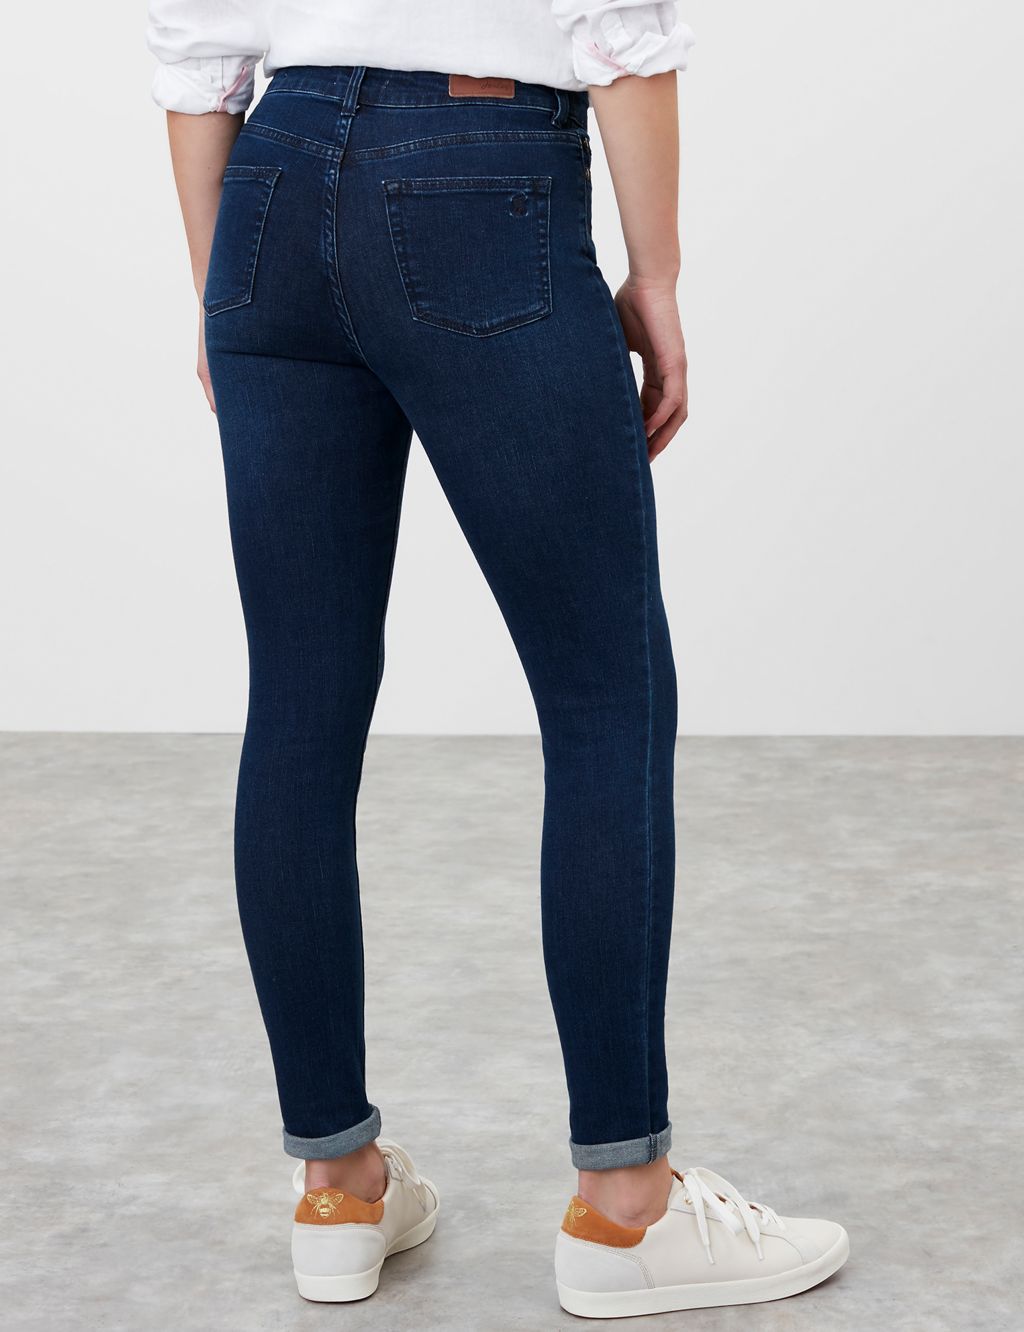 High Waisted Skinny Jeans | Joules | M&S